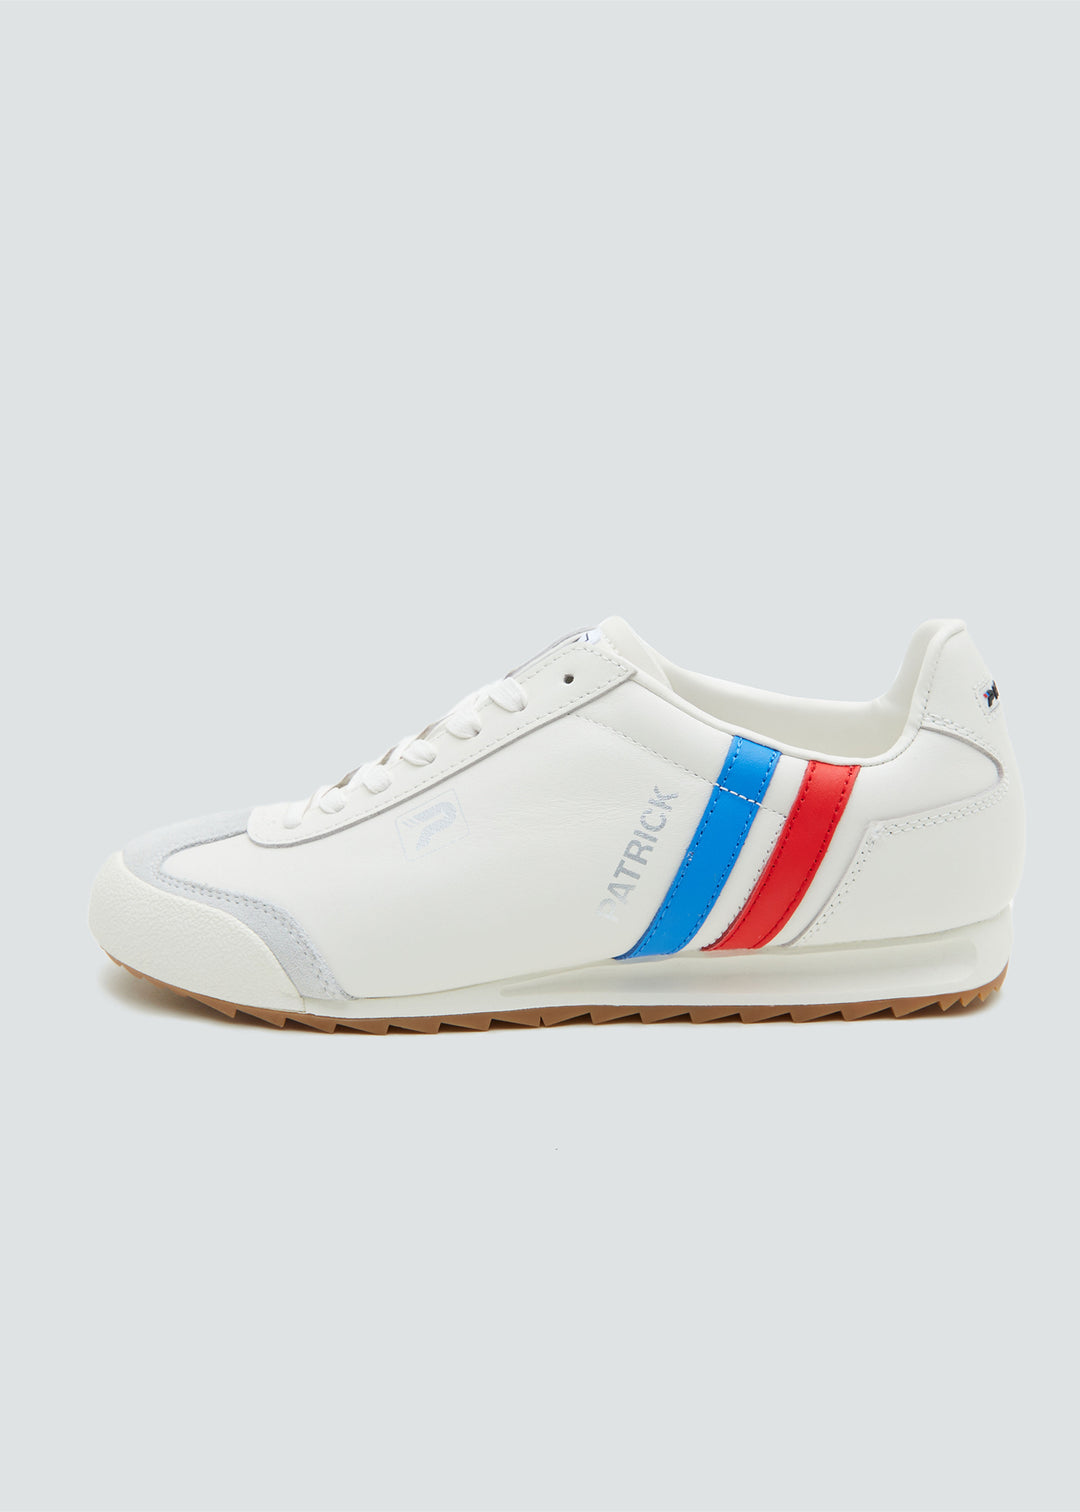 Patrick Liverpool Trainer - White/Blue/Red - Video